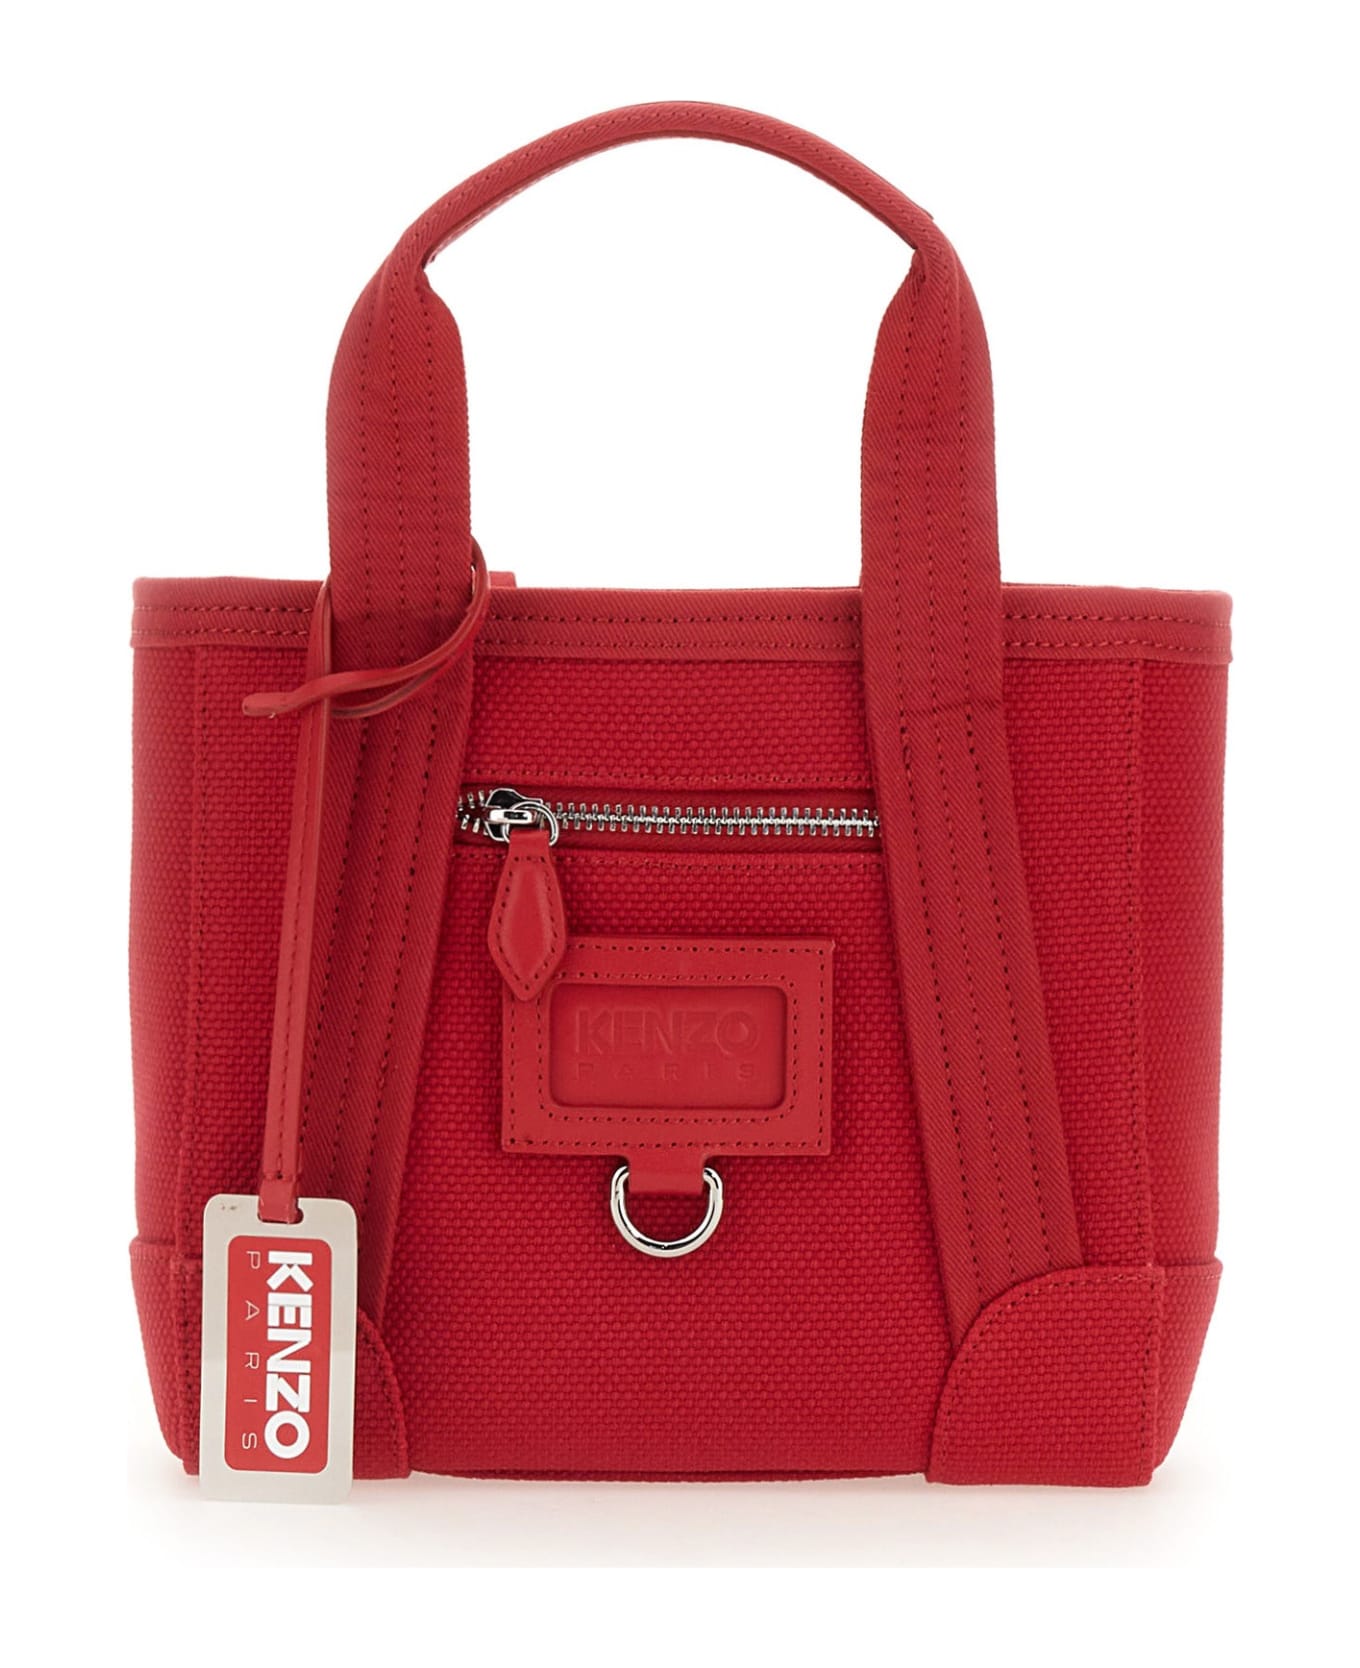 Kenzo Tote Bag - ROSSO